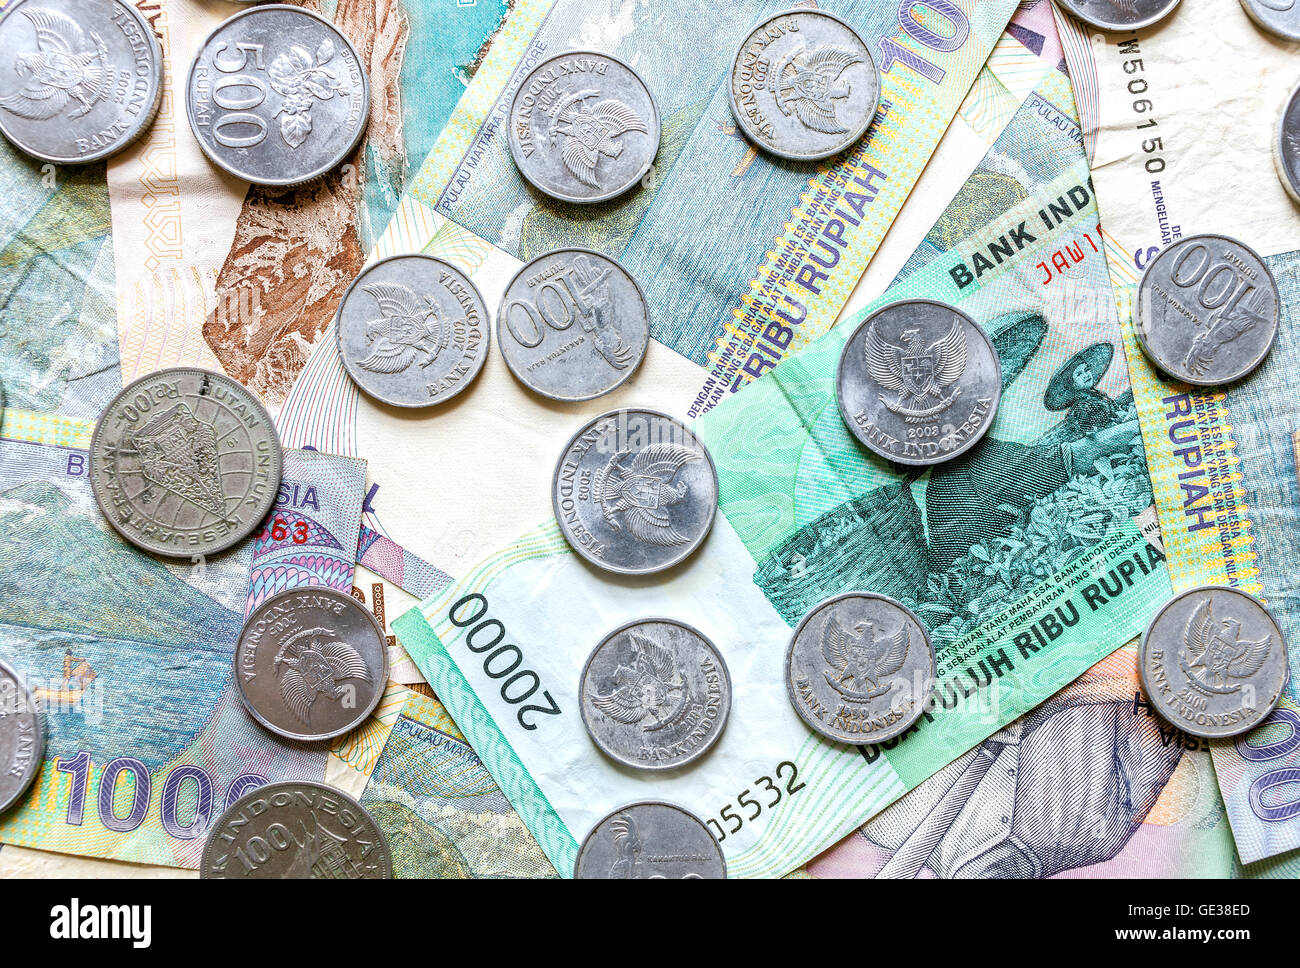 Money from Indonesia, rupiah banknotes and coins. Stock Photo